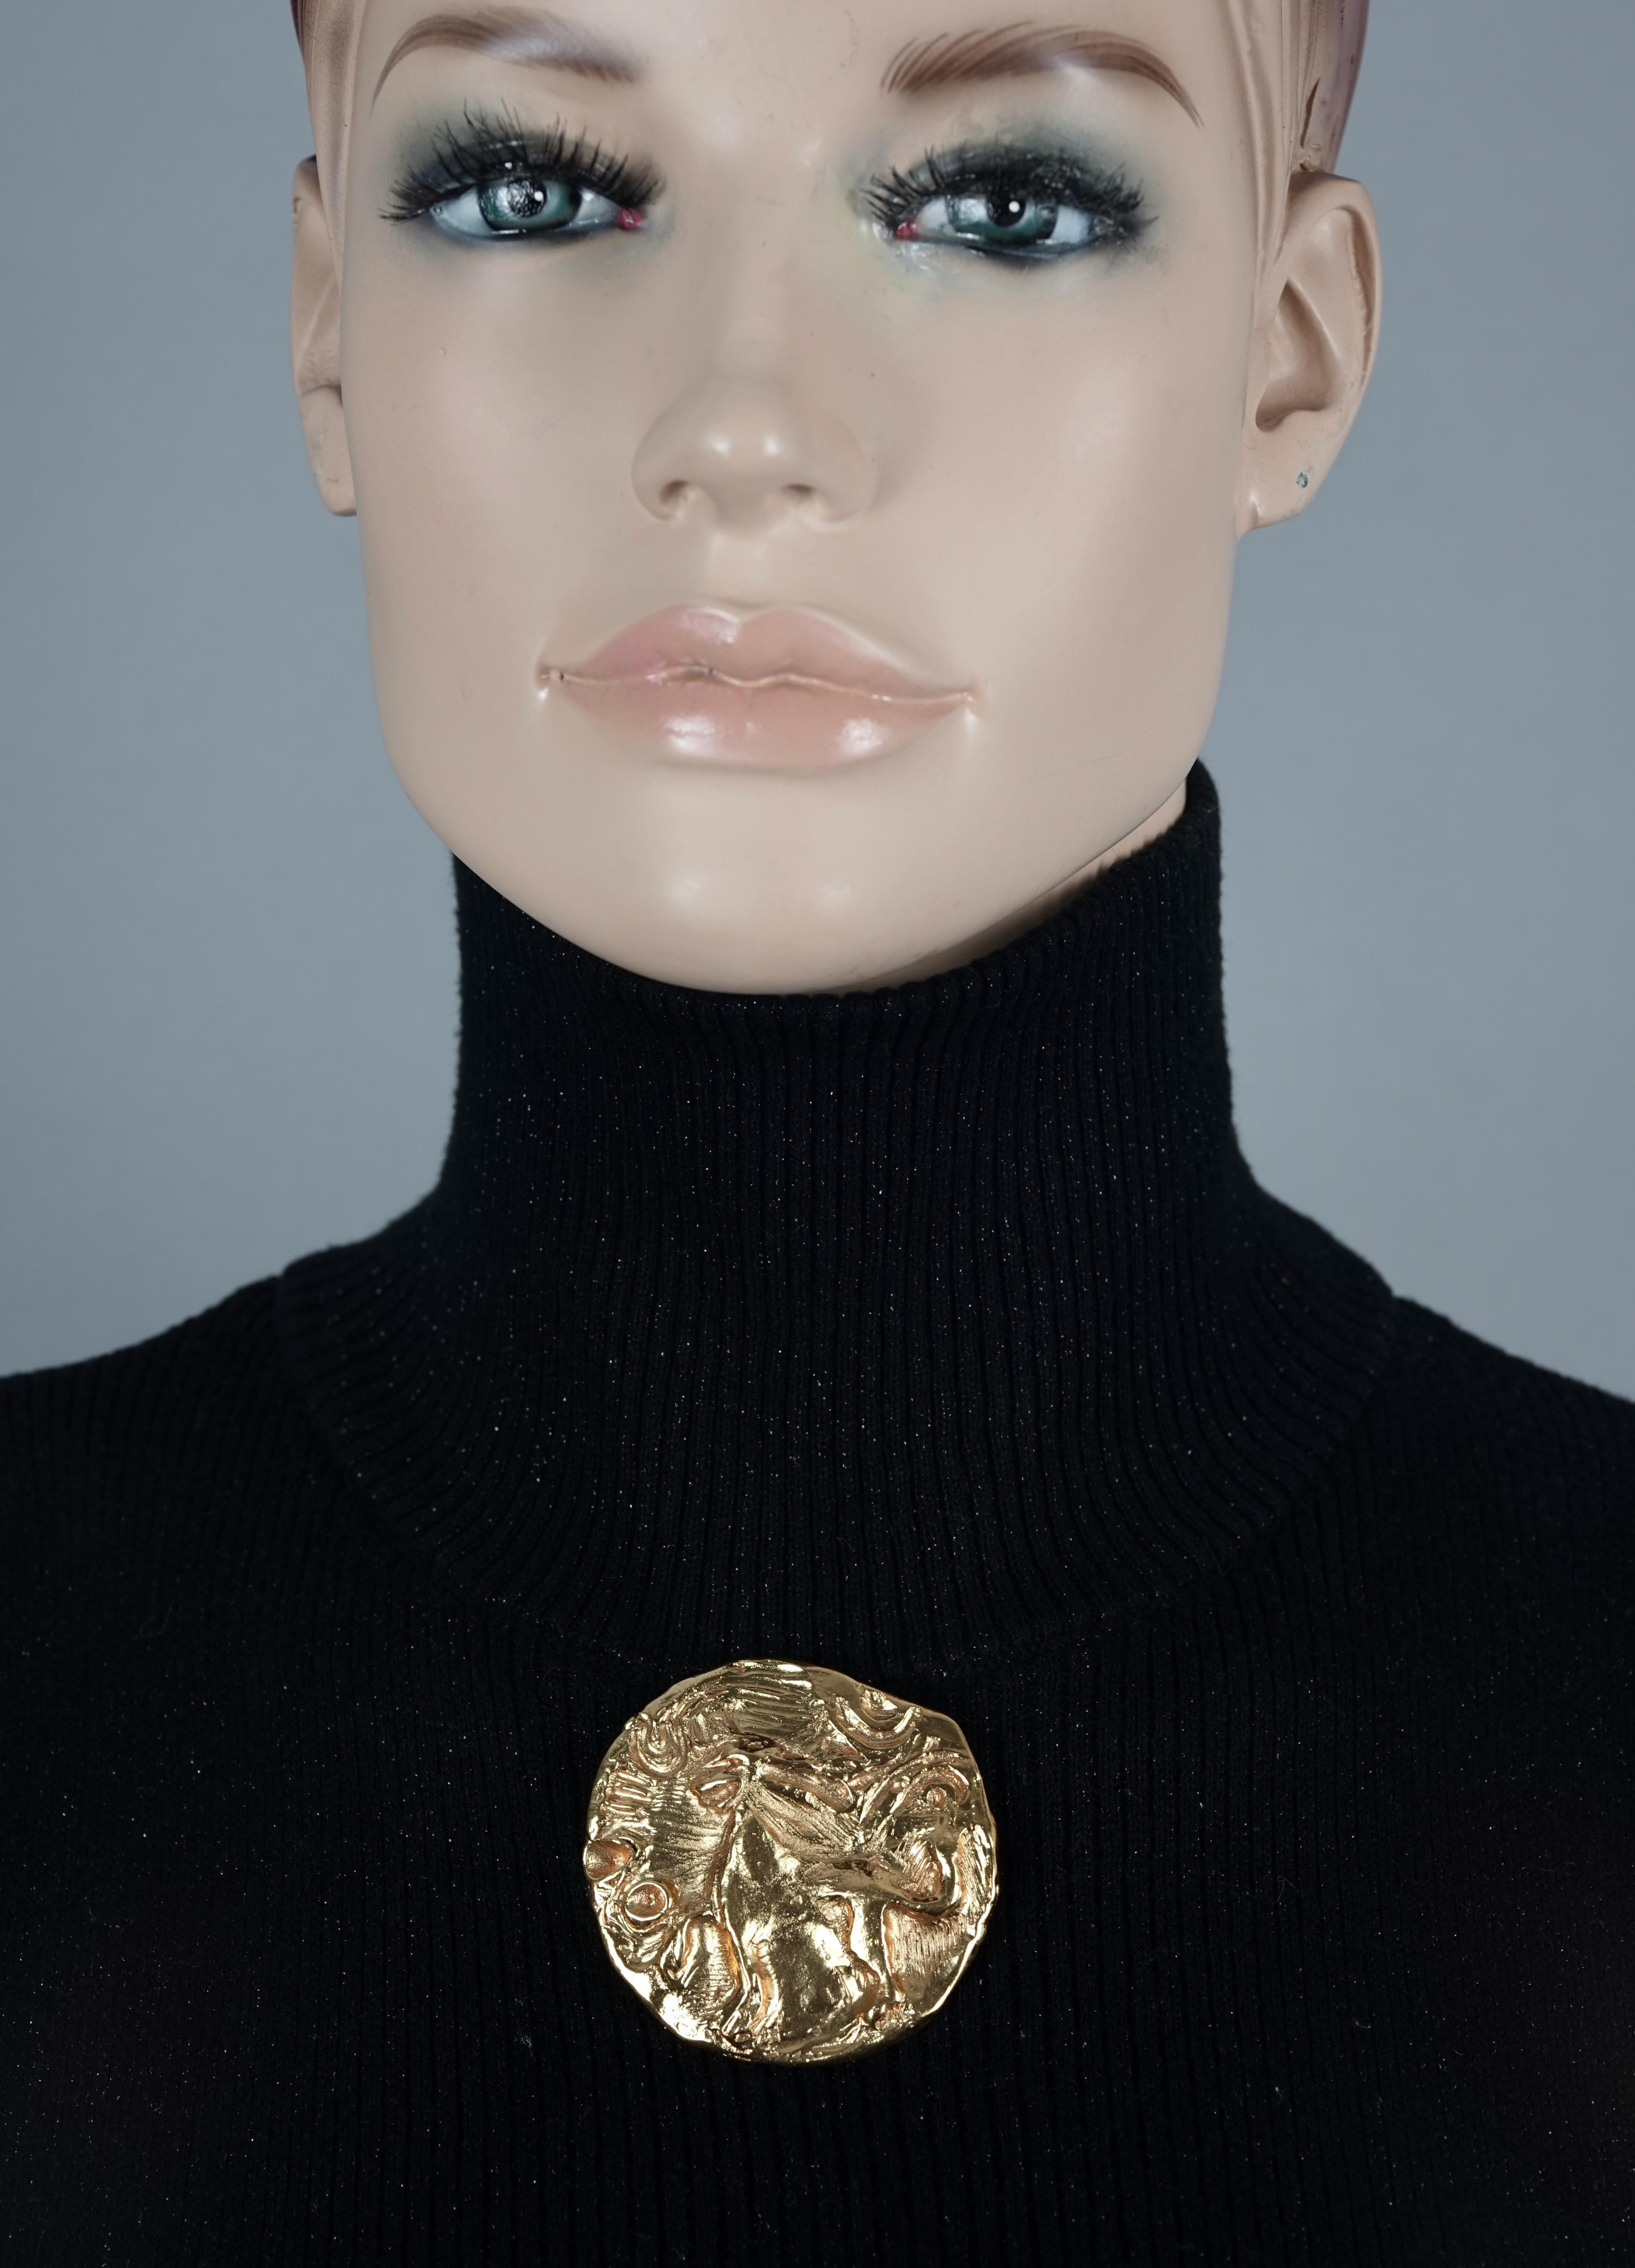 Vintage YVES SAINT LAURENT Ysl by Robert Goossens Lion Medallion Pendant Brooch

Measurements:
Height: 2.20 inches (5.6 cm)
Width: 2.20 inches (5.6 cm)

Features:
- 100% Authentic YVES SAINT LAURENT by Robert Goossens.
- Textured and raised lion